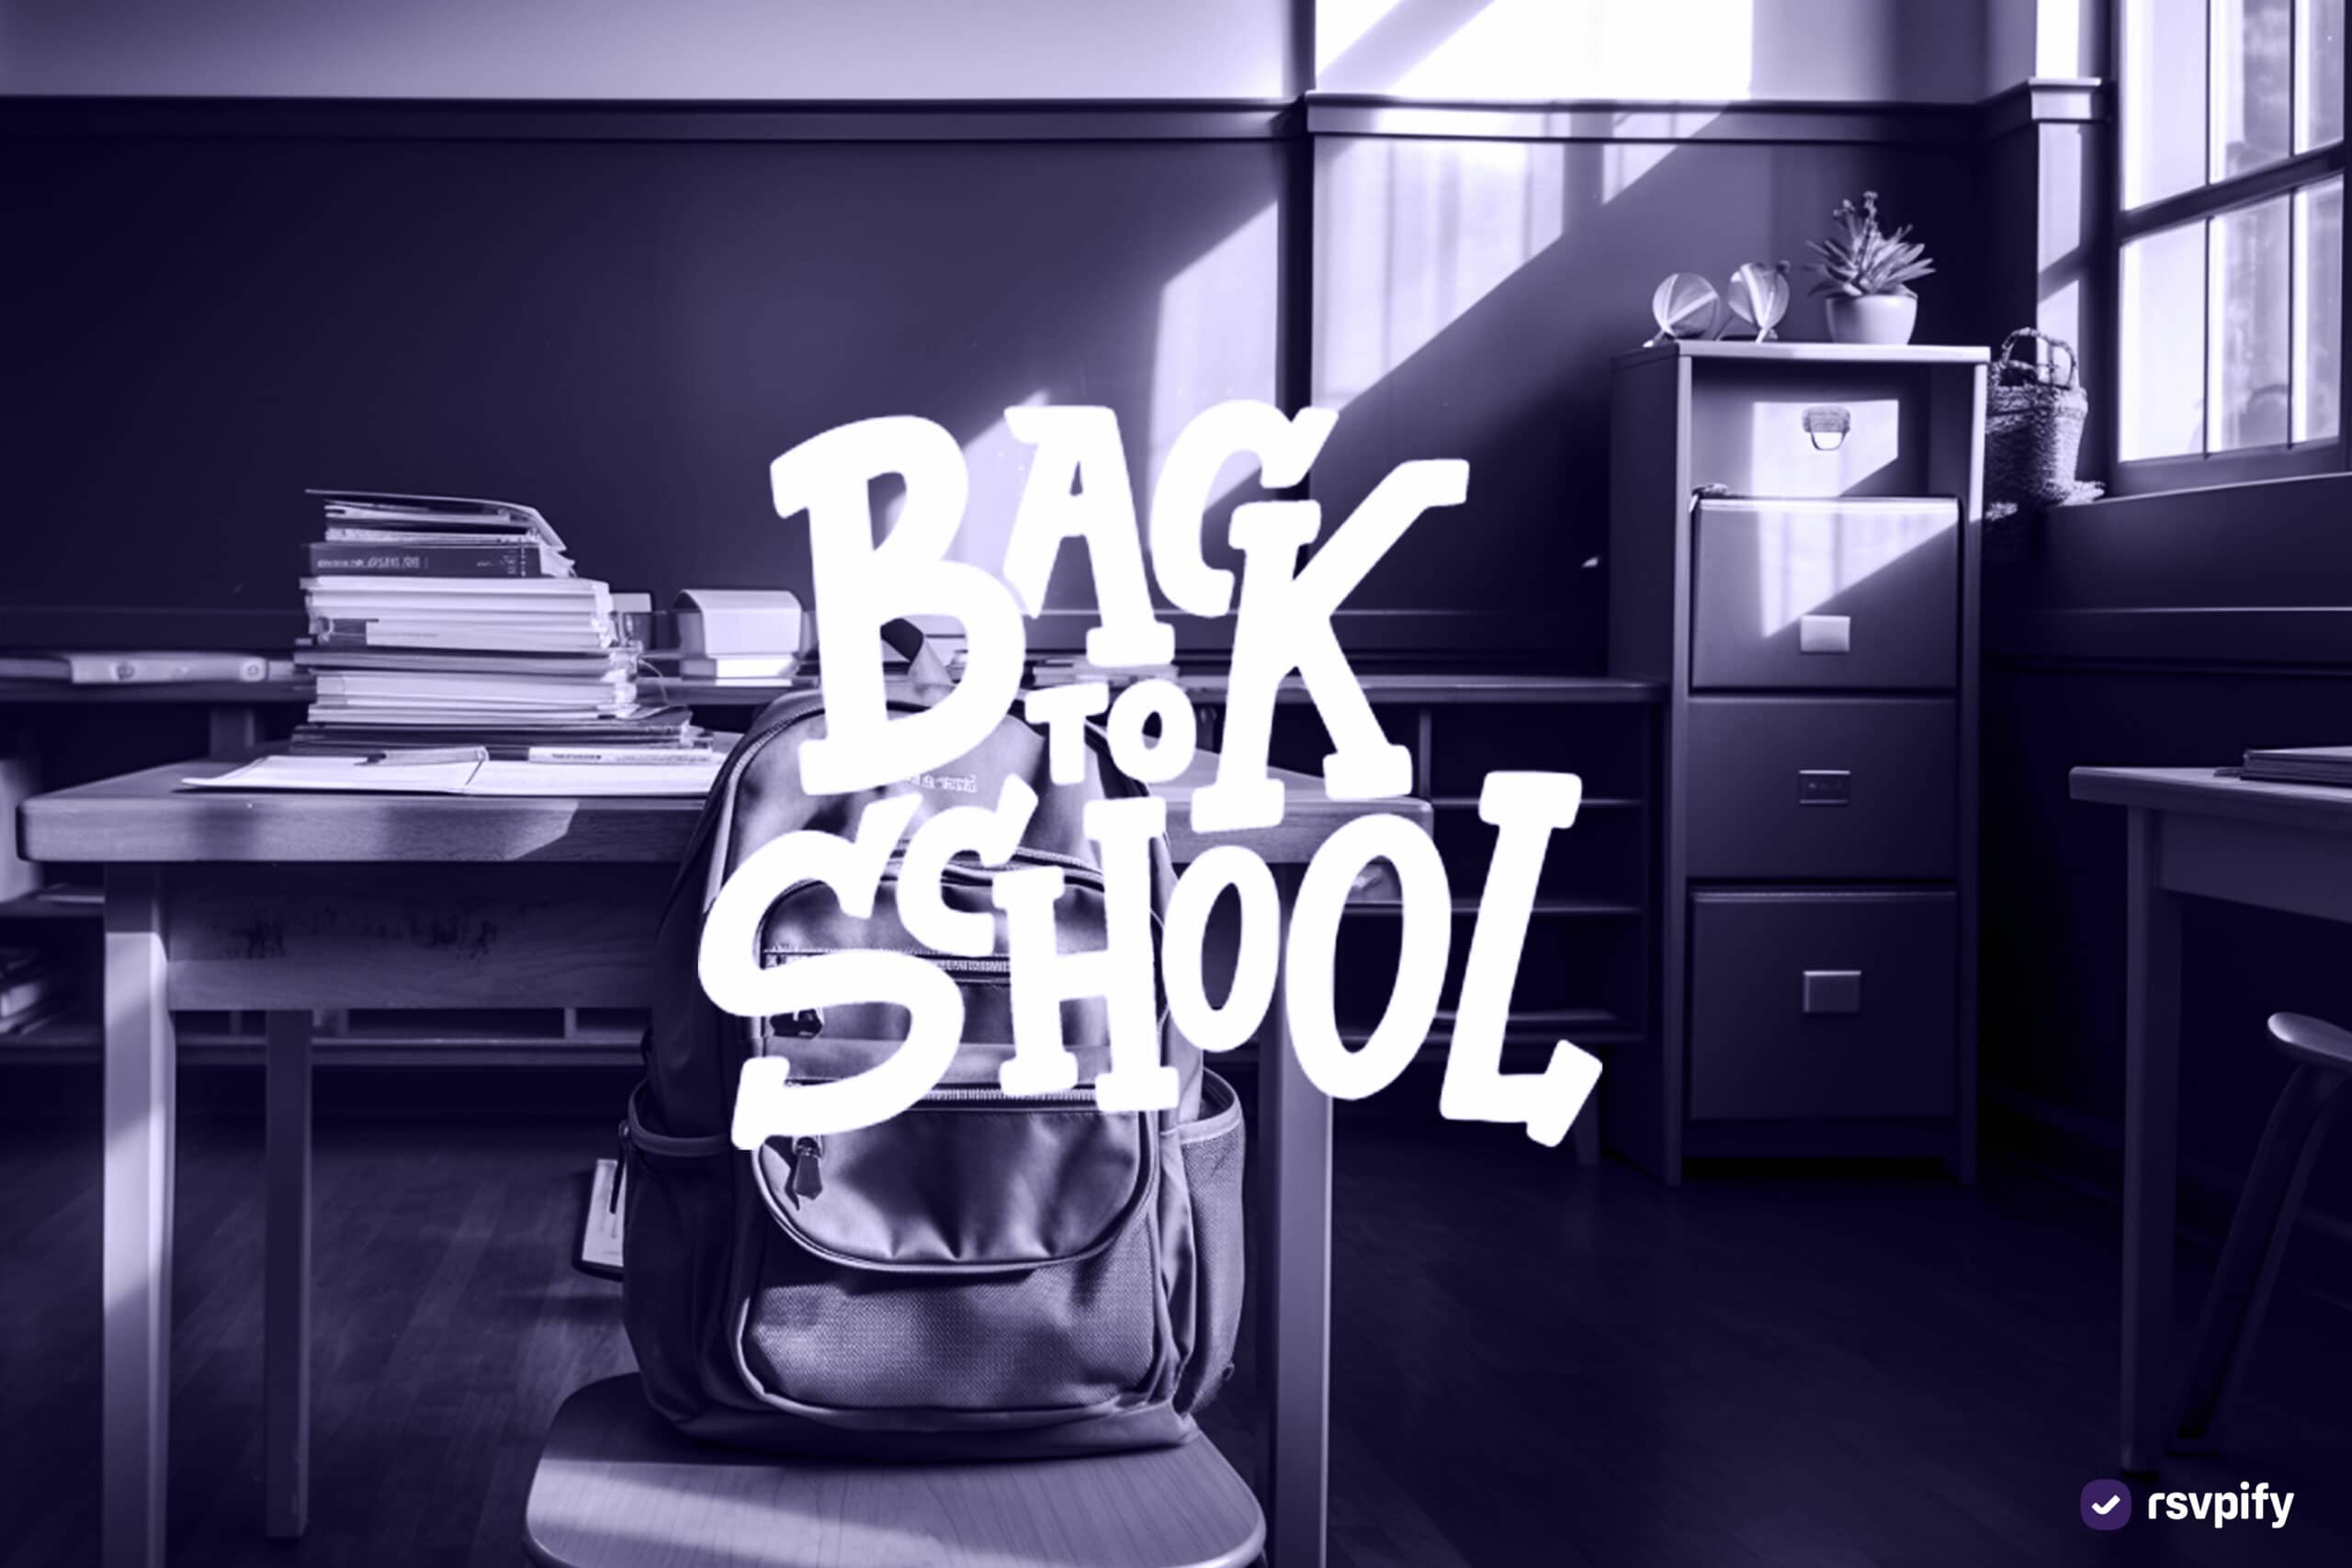 Use these back to school event ideas to make your event memorable